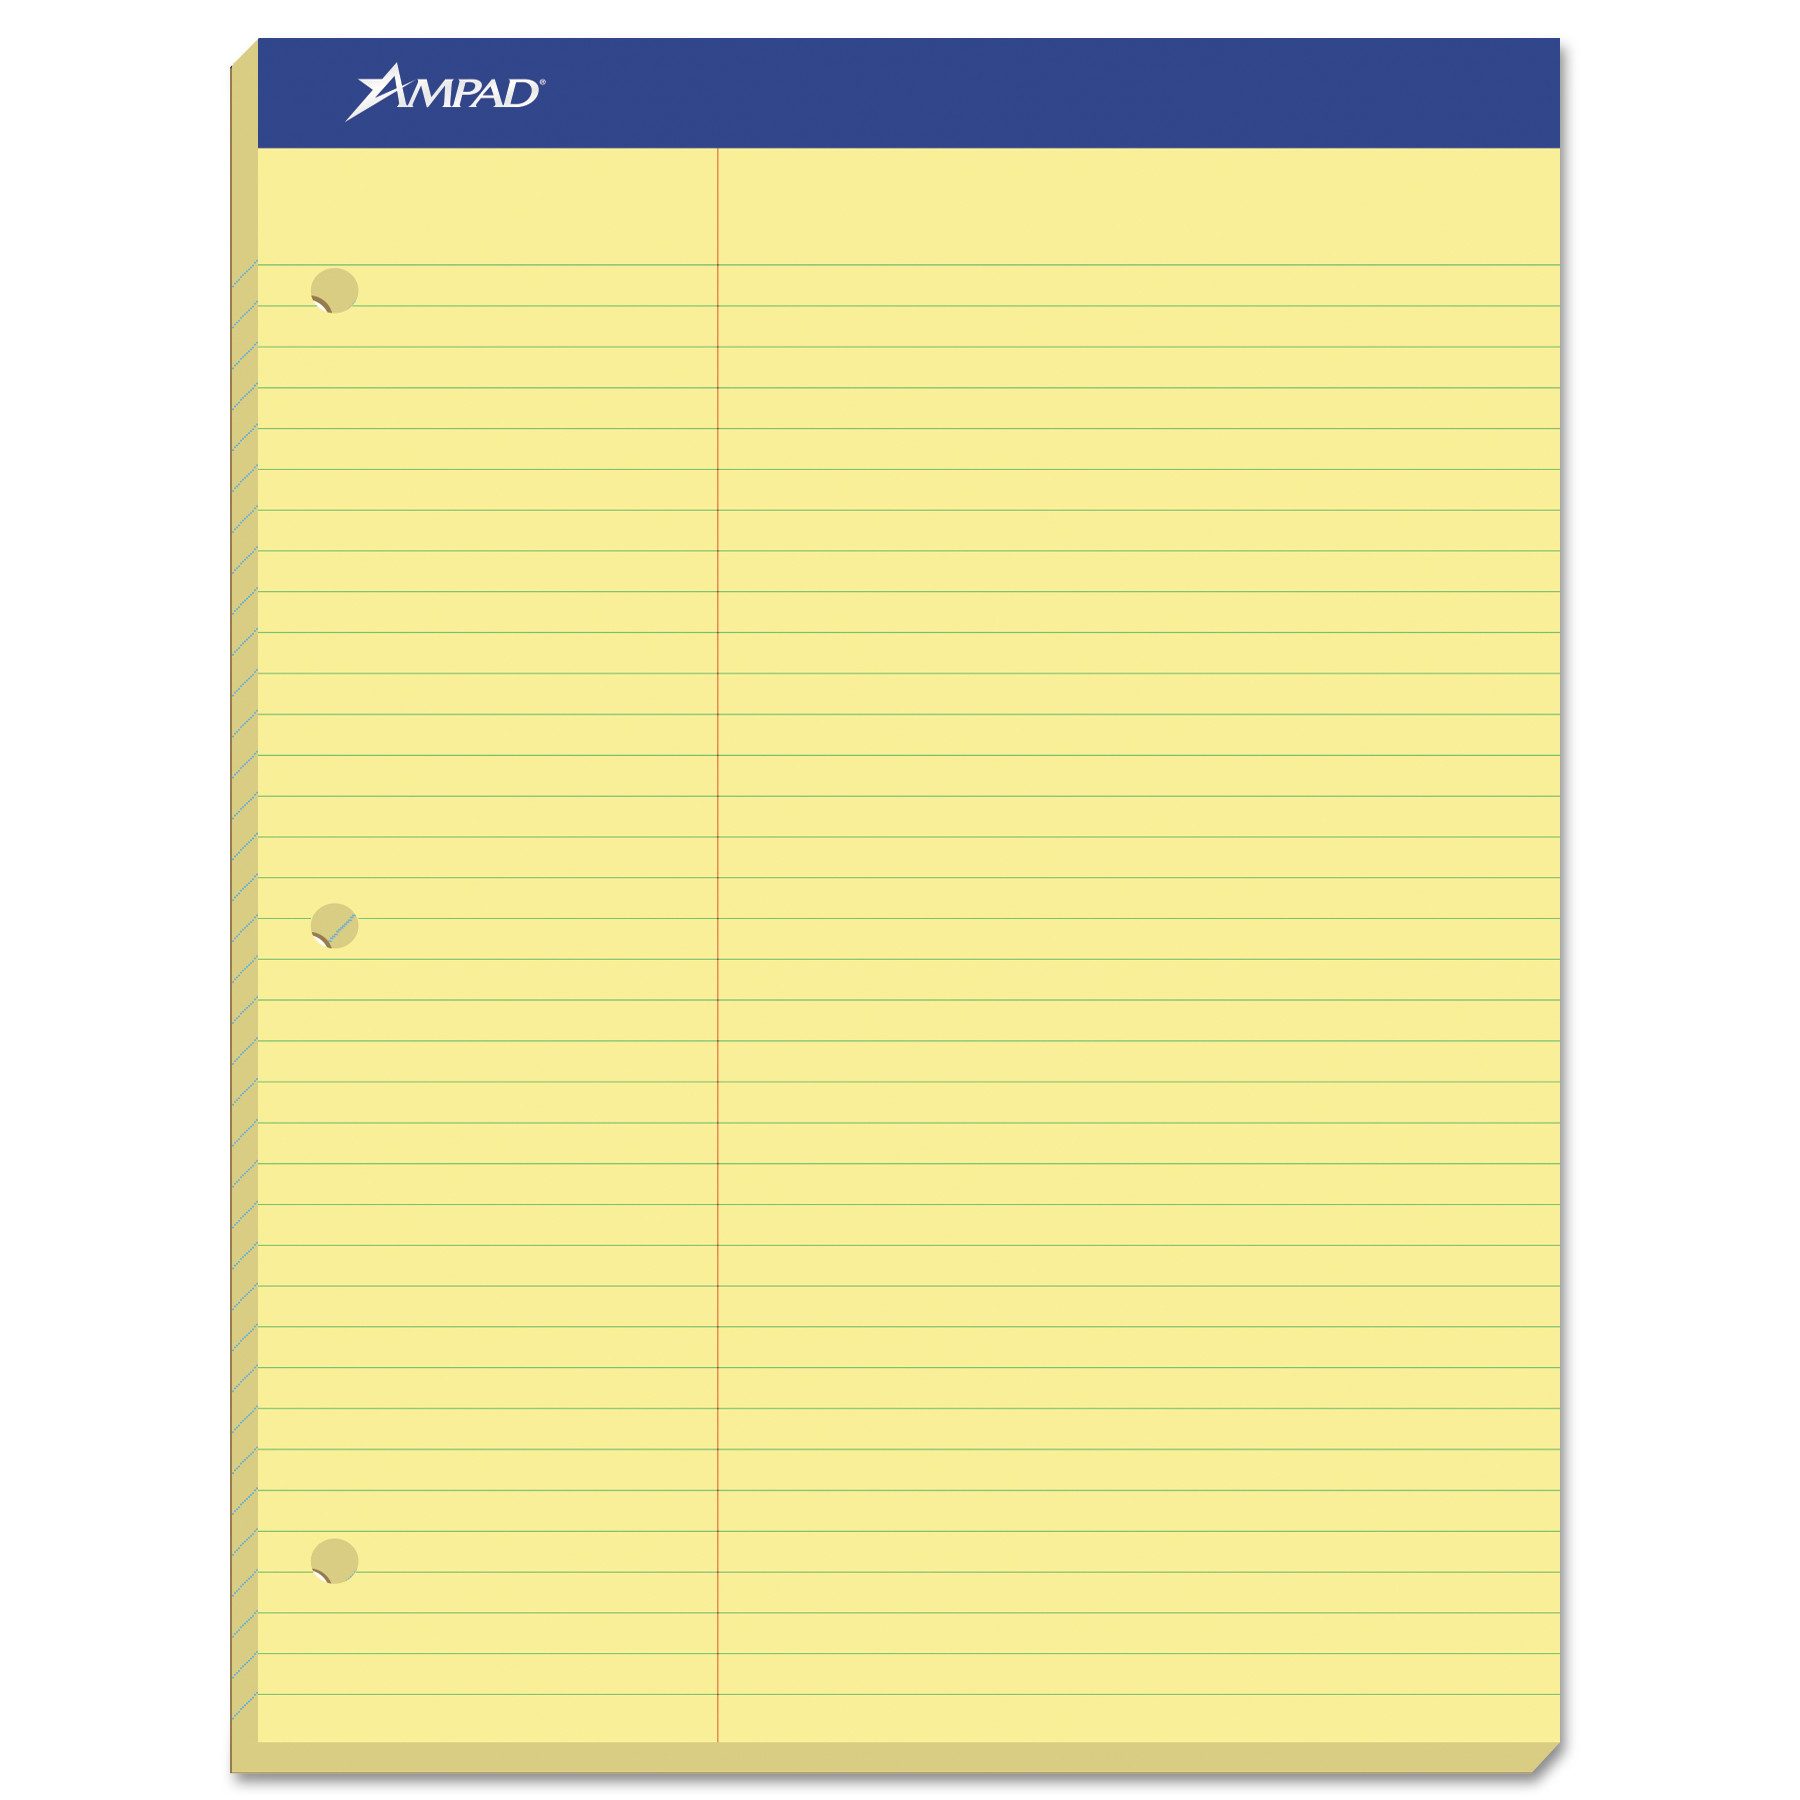  Ampad 20-245 Double Sheet Pads, Pitman Rule, 8.5 x 11.75, Canary, 100 Sheets (TOP20245) 